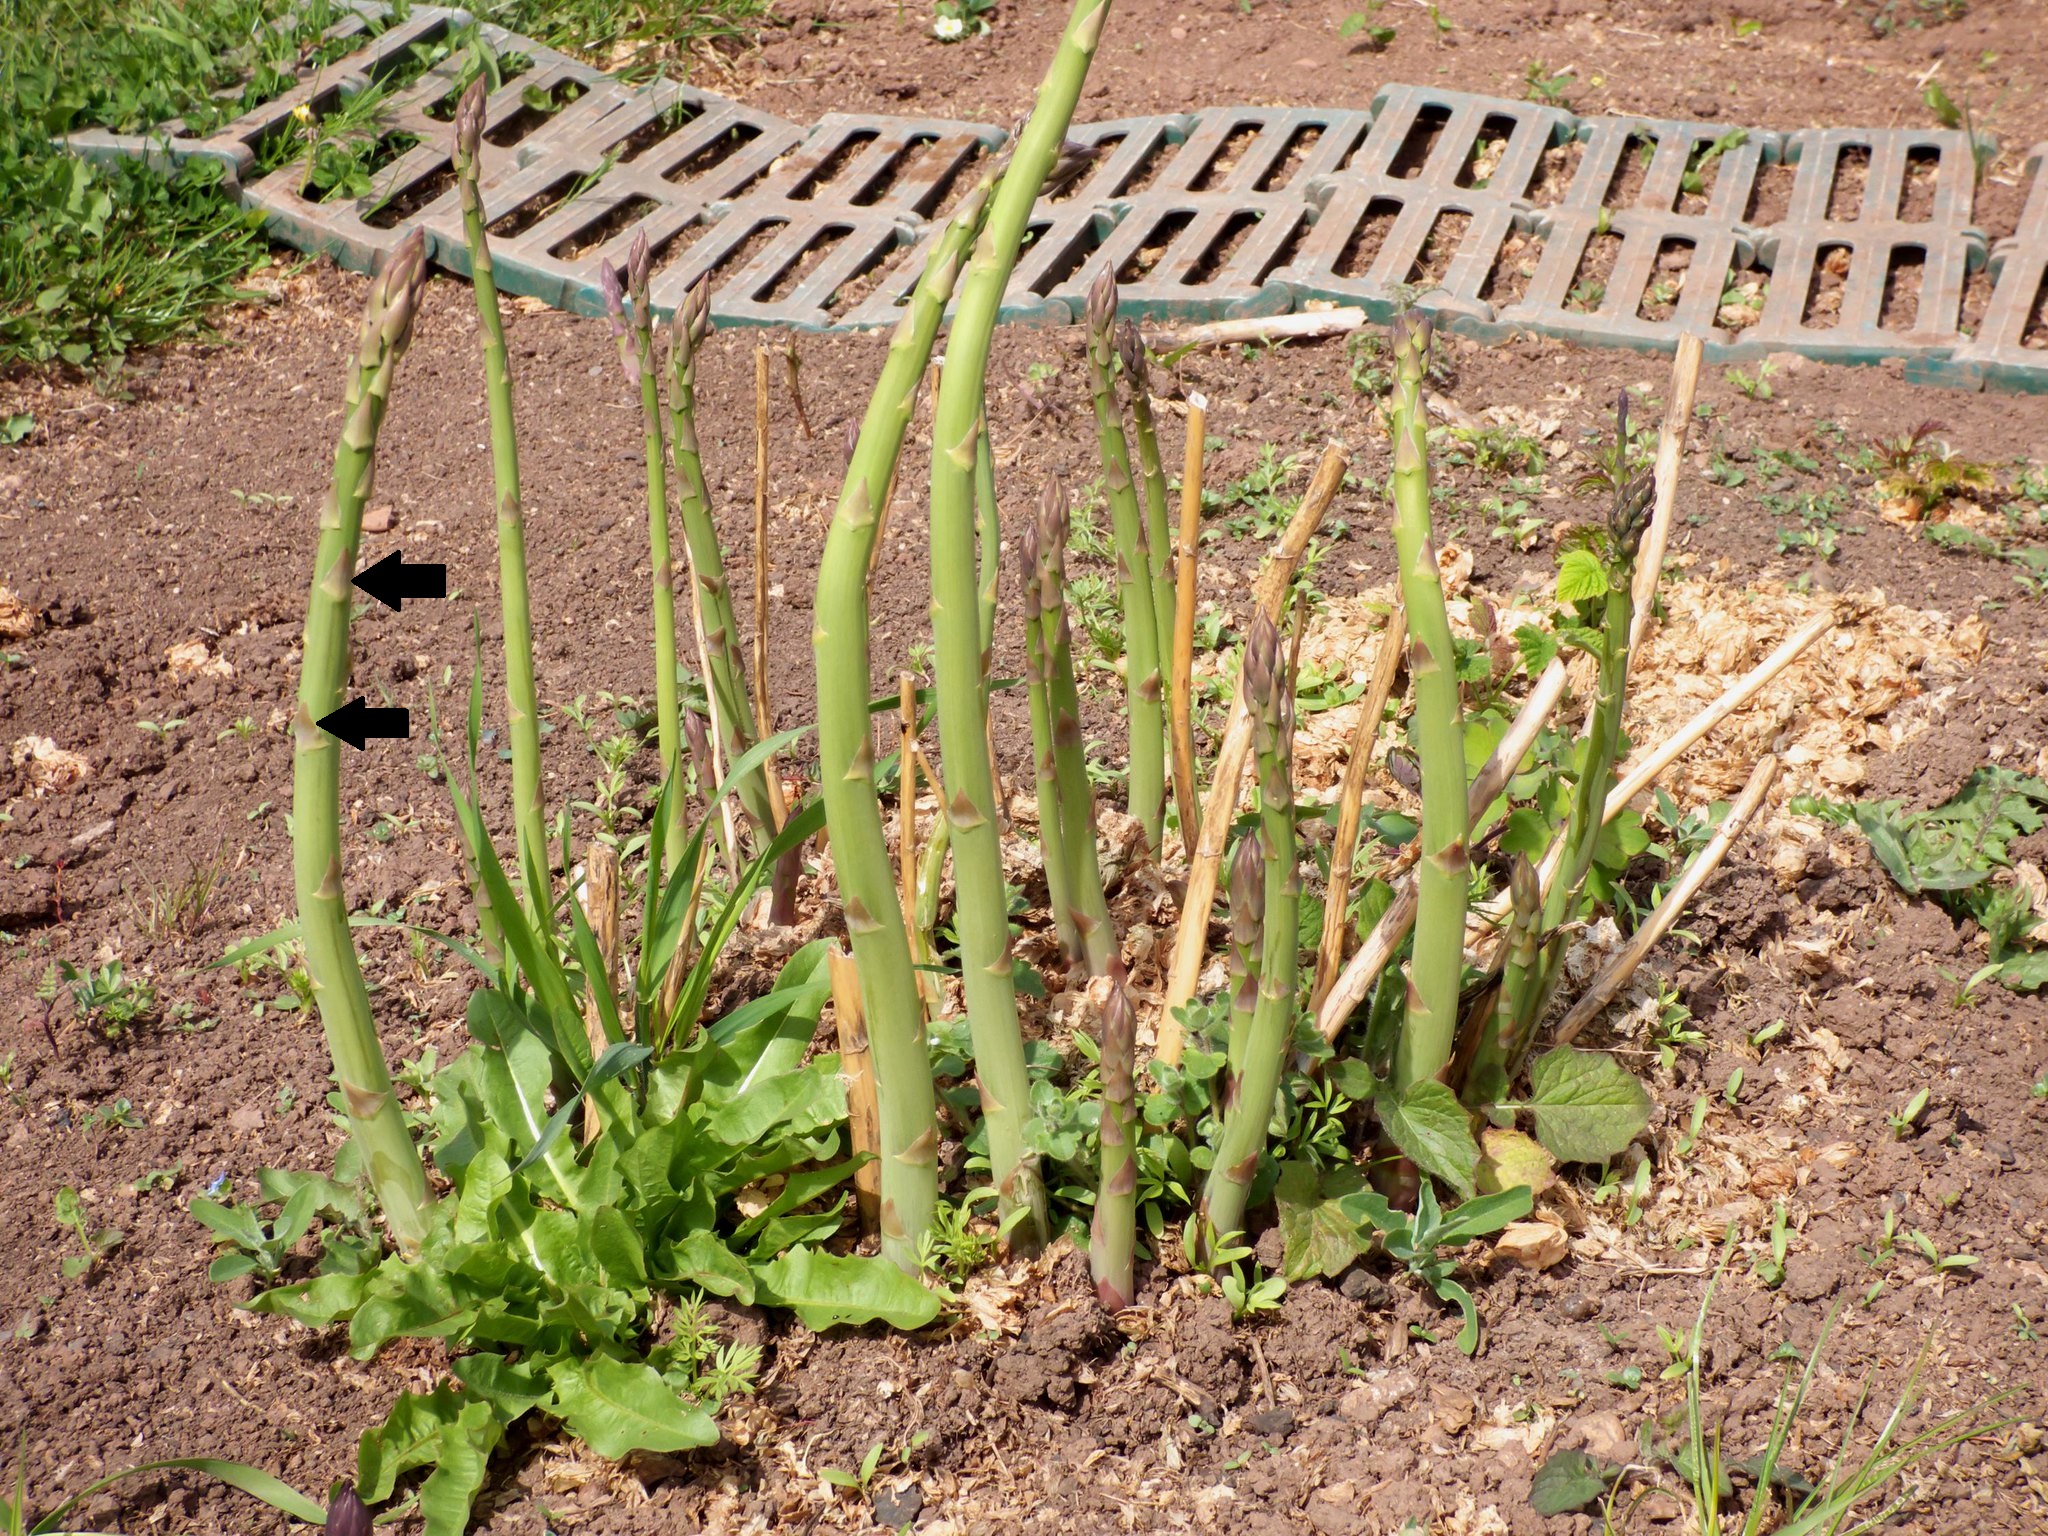 A young asparagus plant has not yet formed cladophylls. The actual leaves are reddish, triangular scales along the stem.